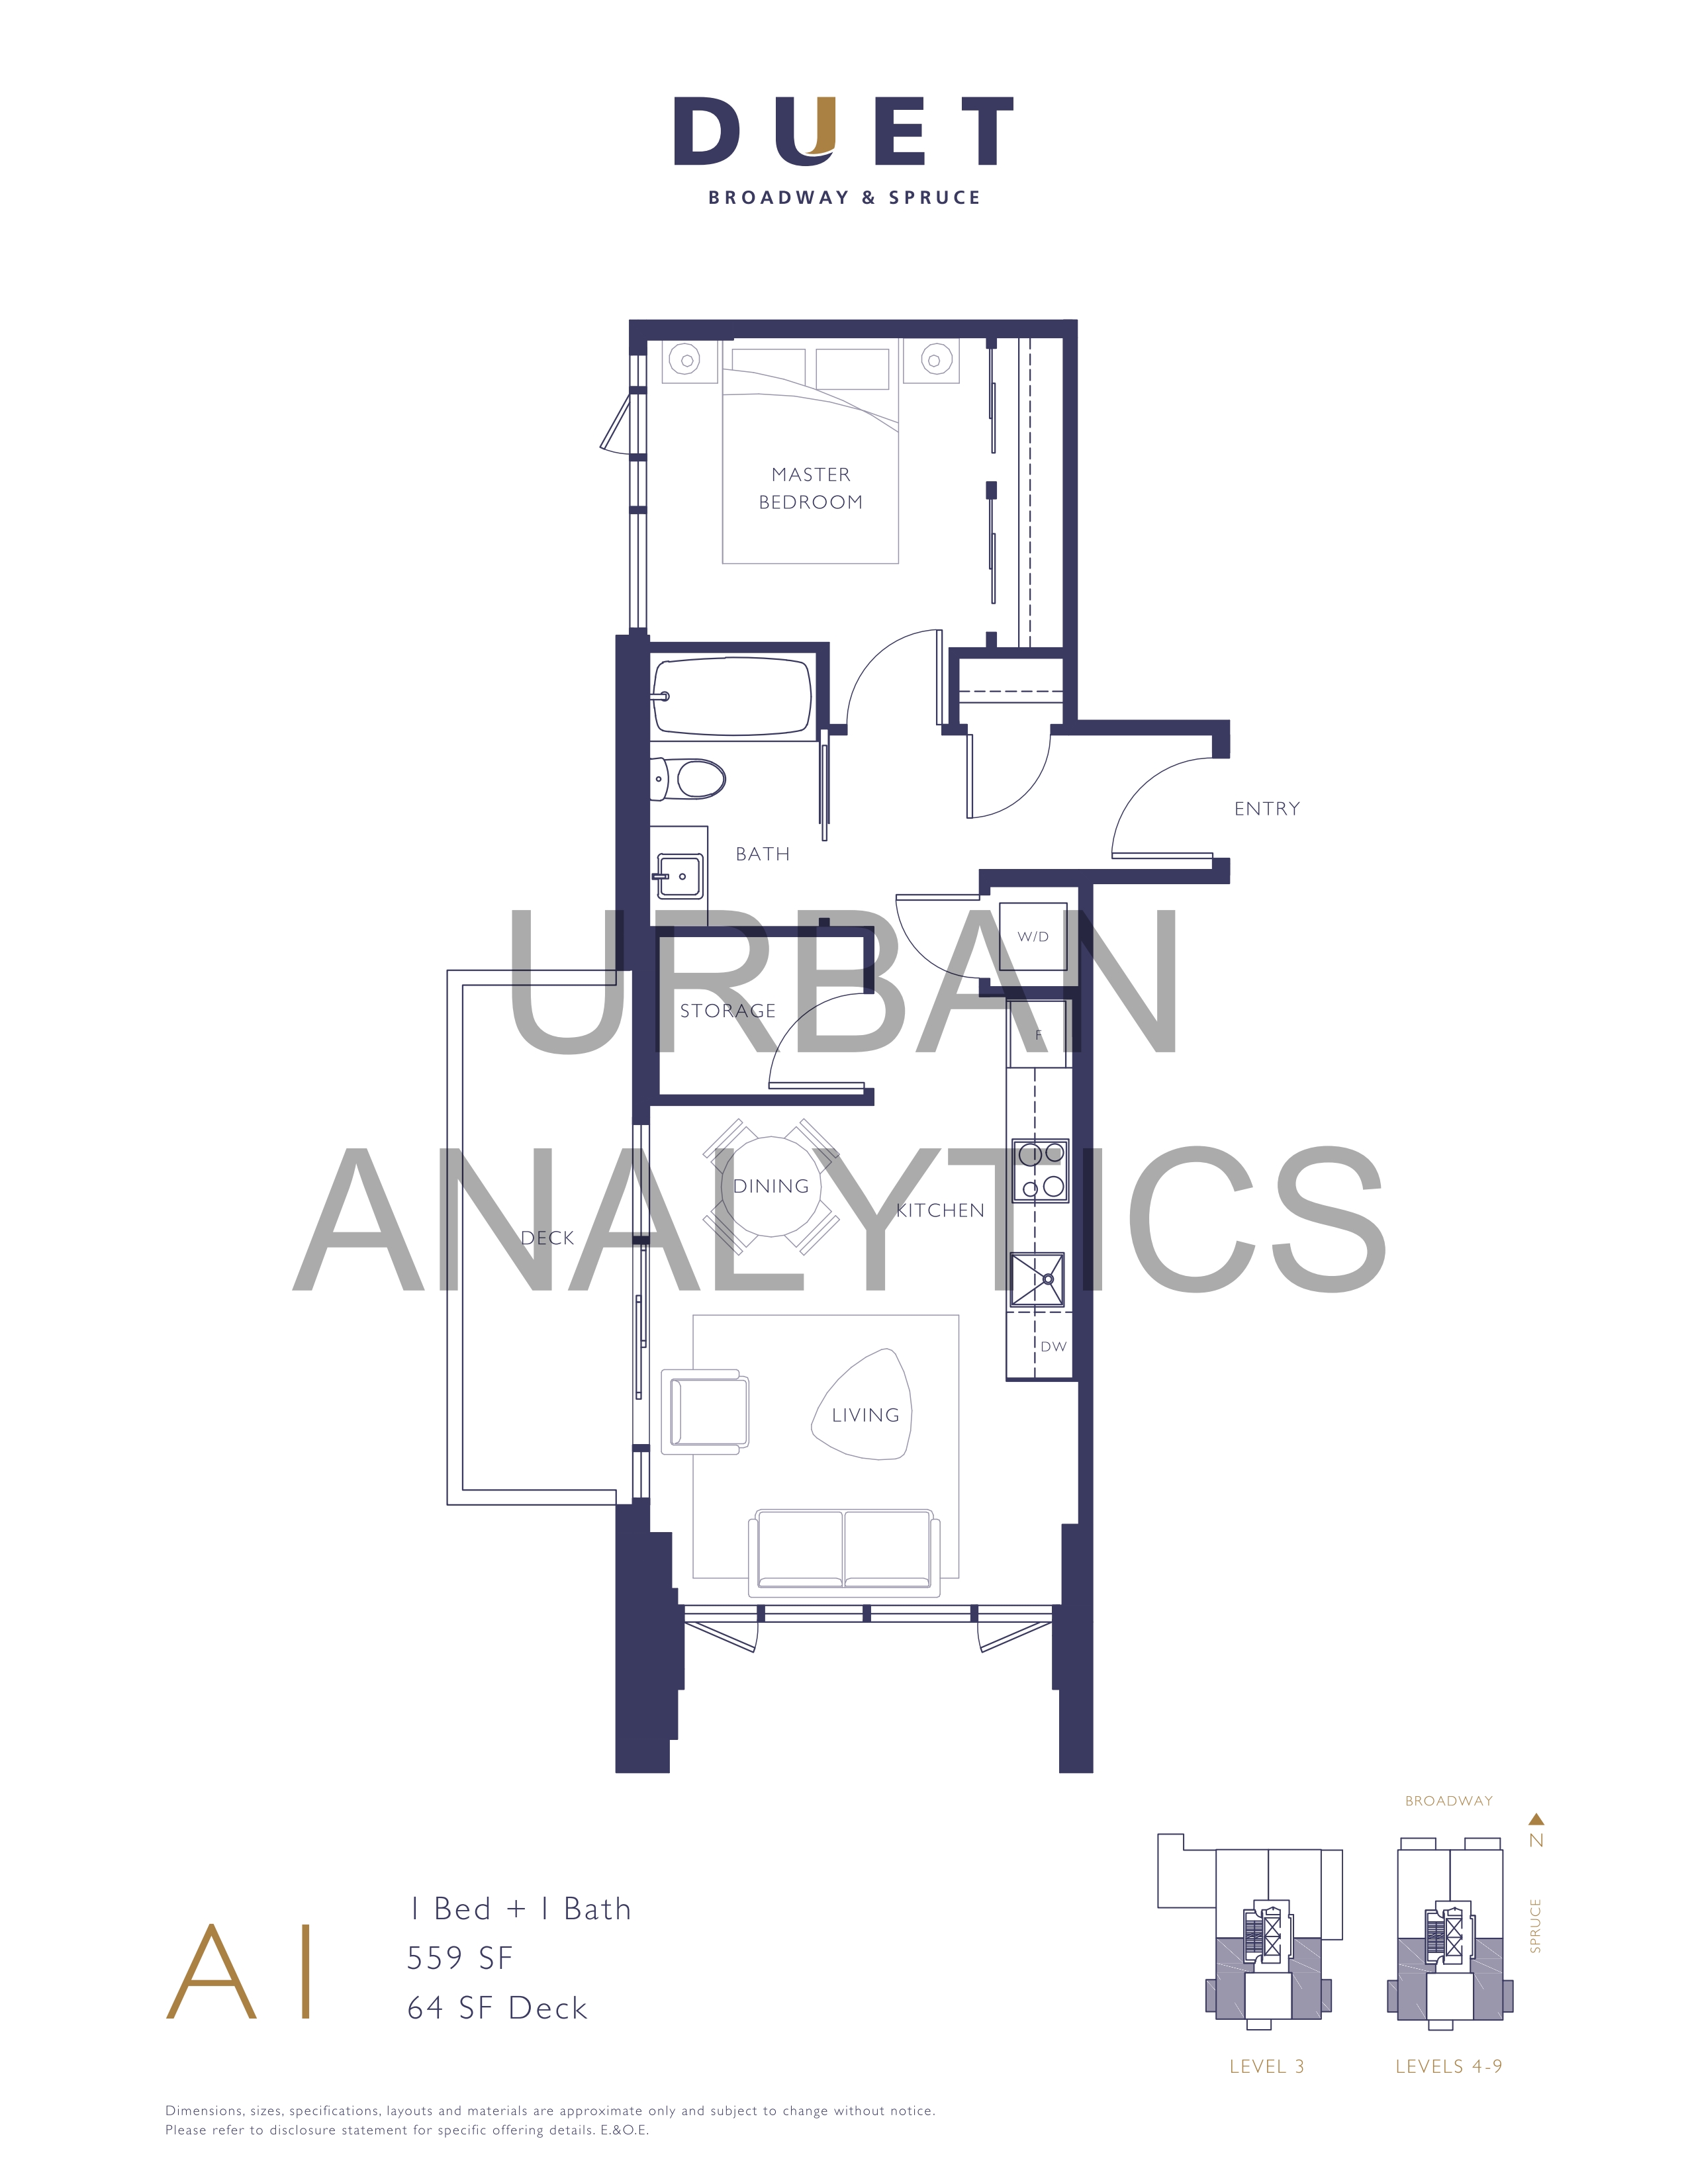 A1 Floor Plan of Duet Condos with undefined beds